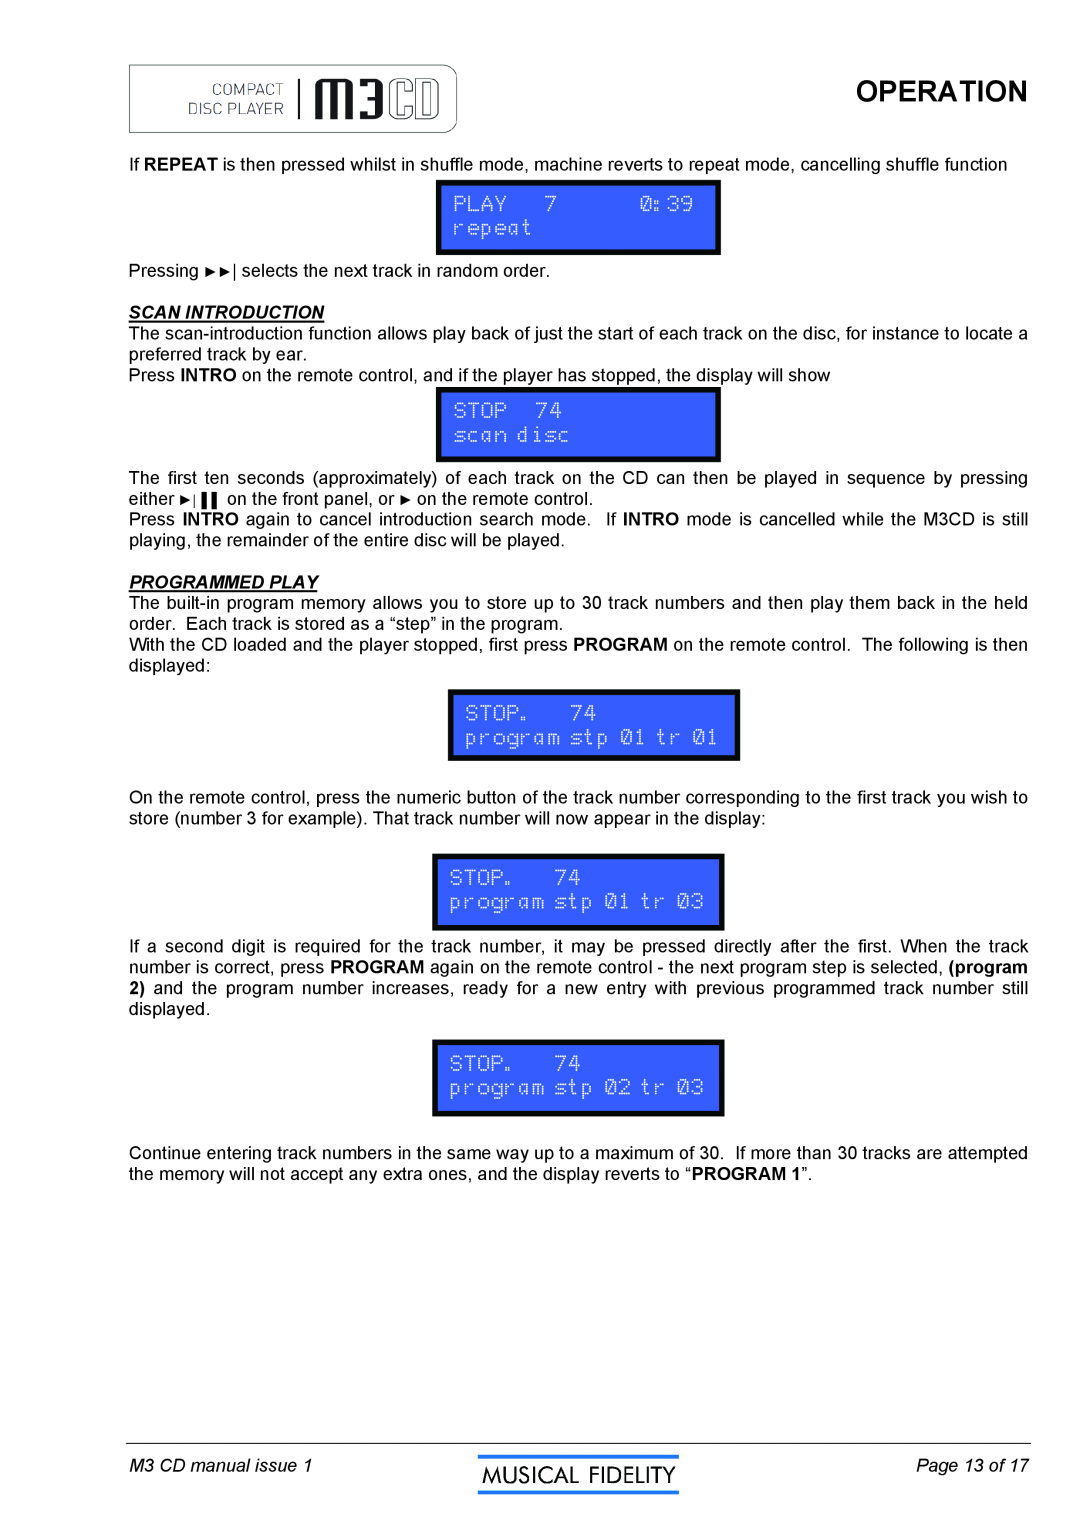 Musical Fidelity M3CD Scan Introduction, Programmed Play, Operation, M3 CD manual issue, Page 13 of 